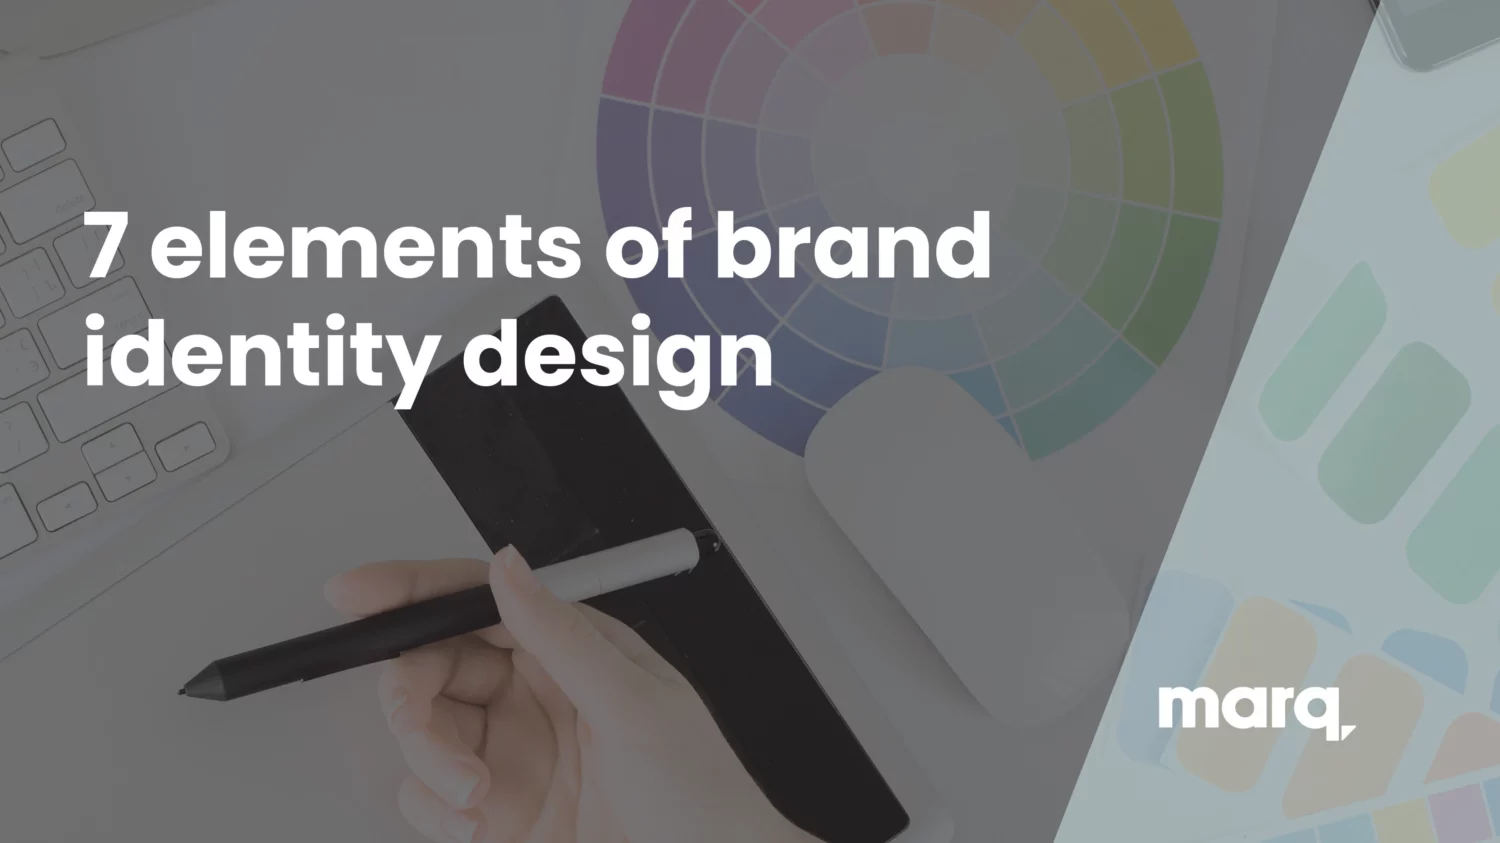 Brand Personality: How to Build a More Human Brand